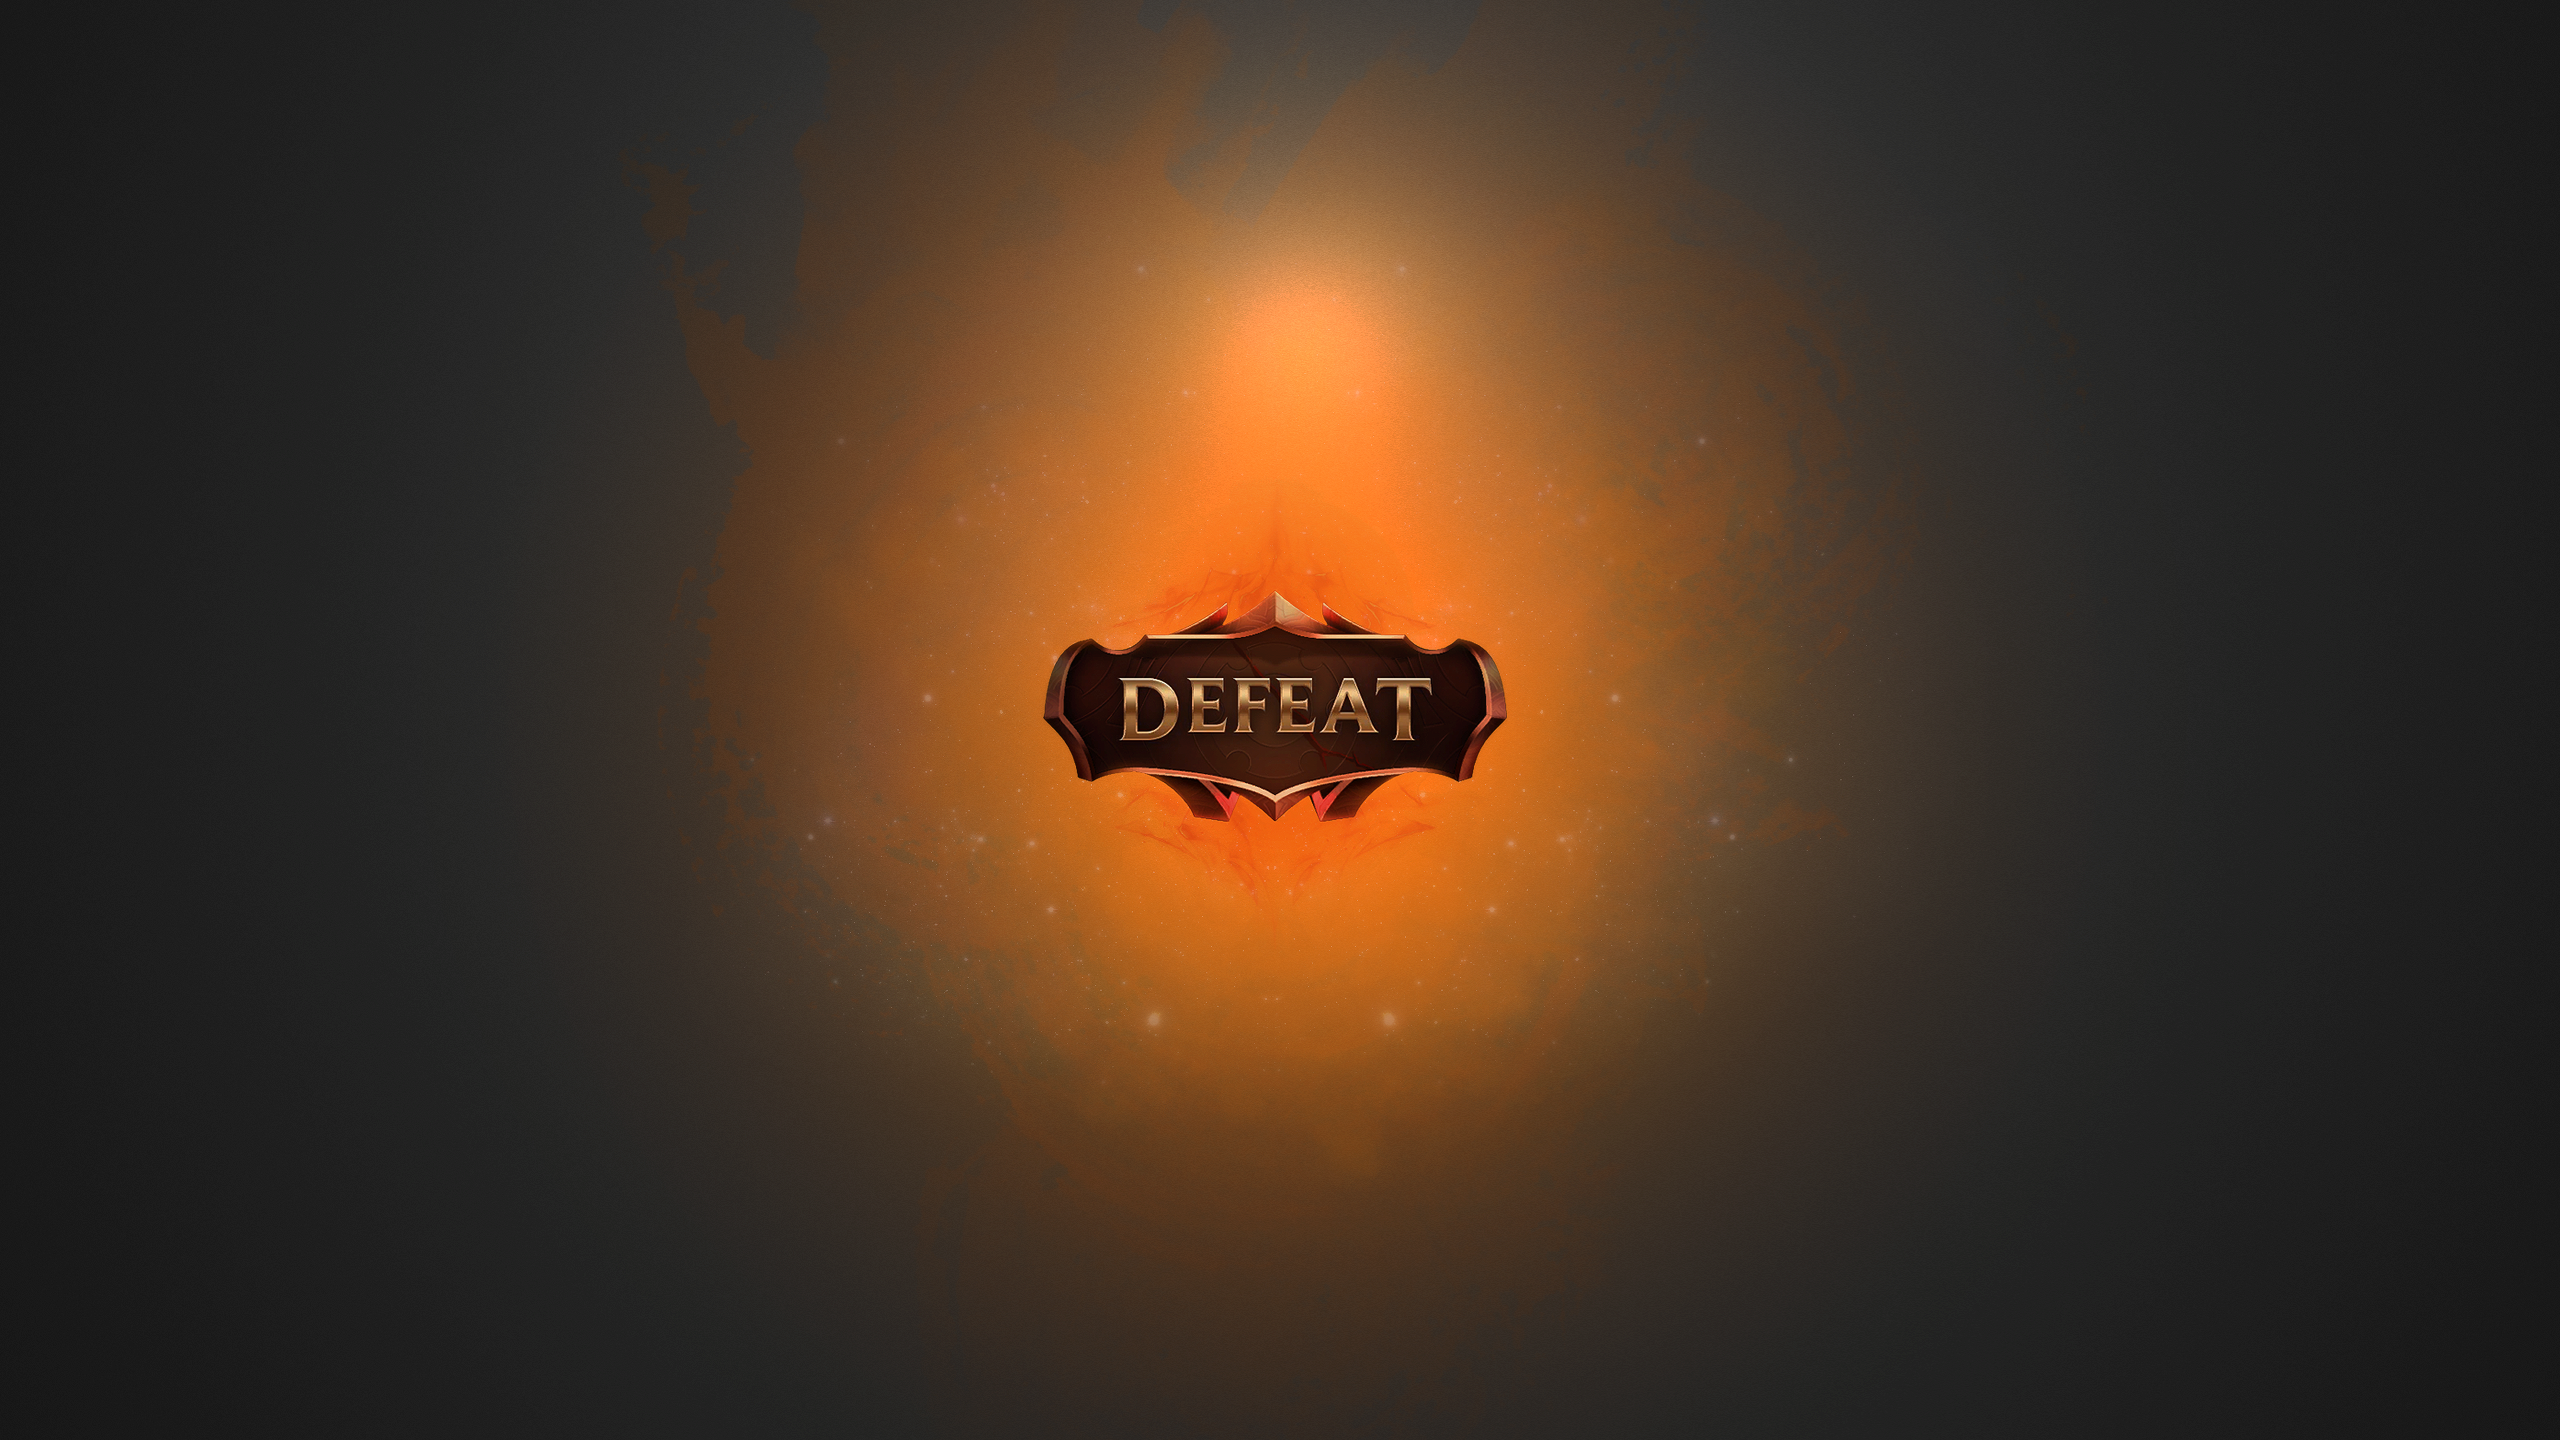 I made some wallpapers with the new VictoryDefeat images 2560x1440